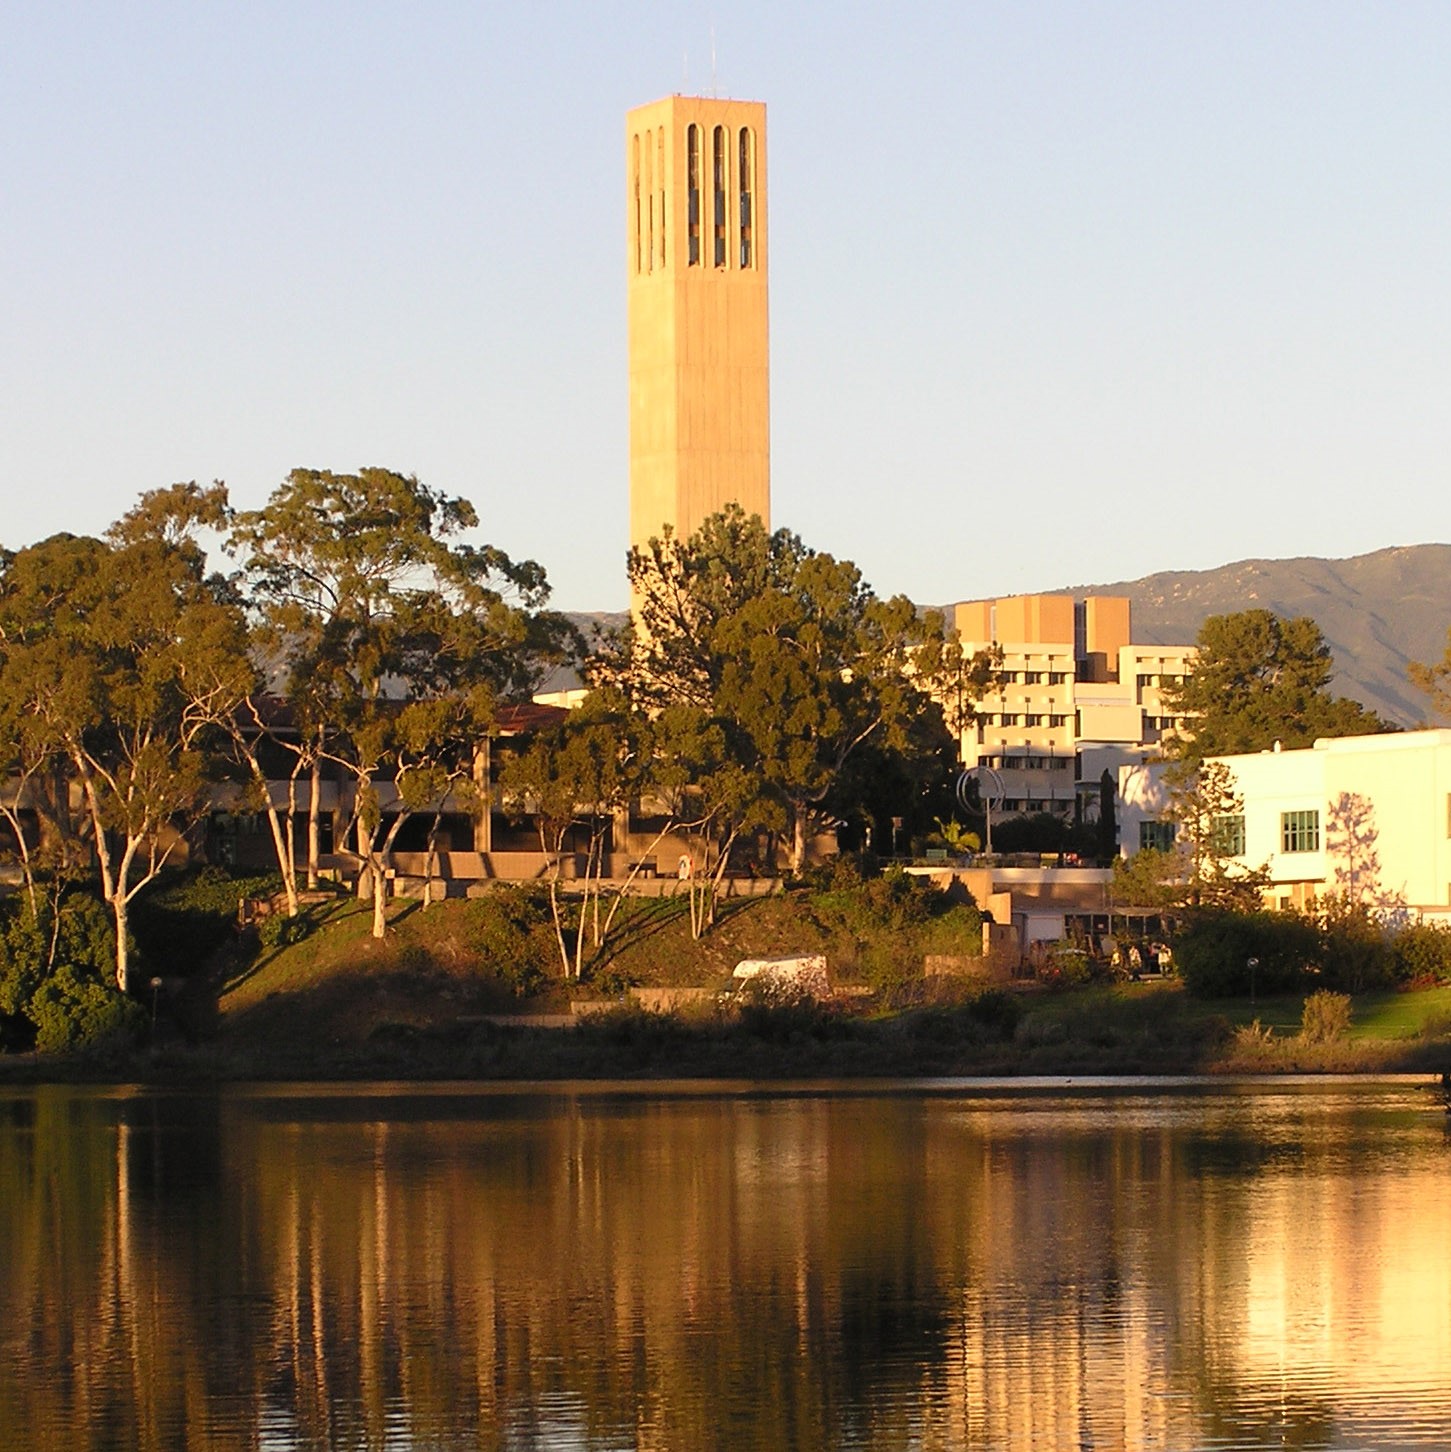 UCSB's Storke Tower and campus lagoon